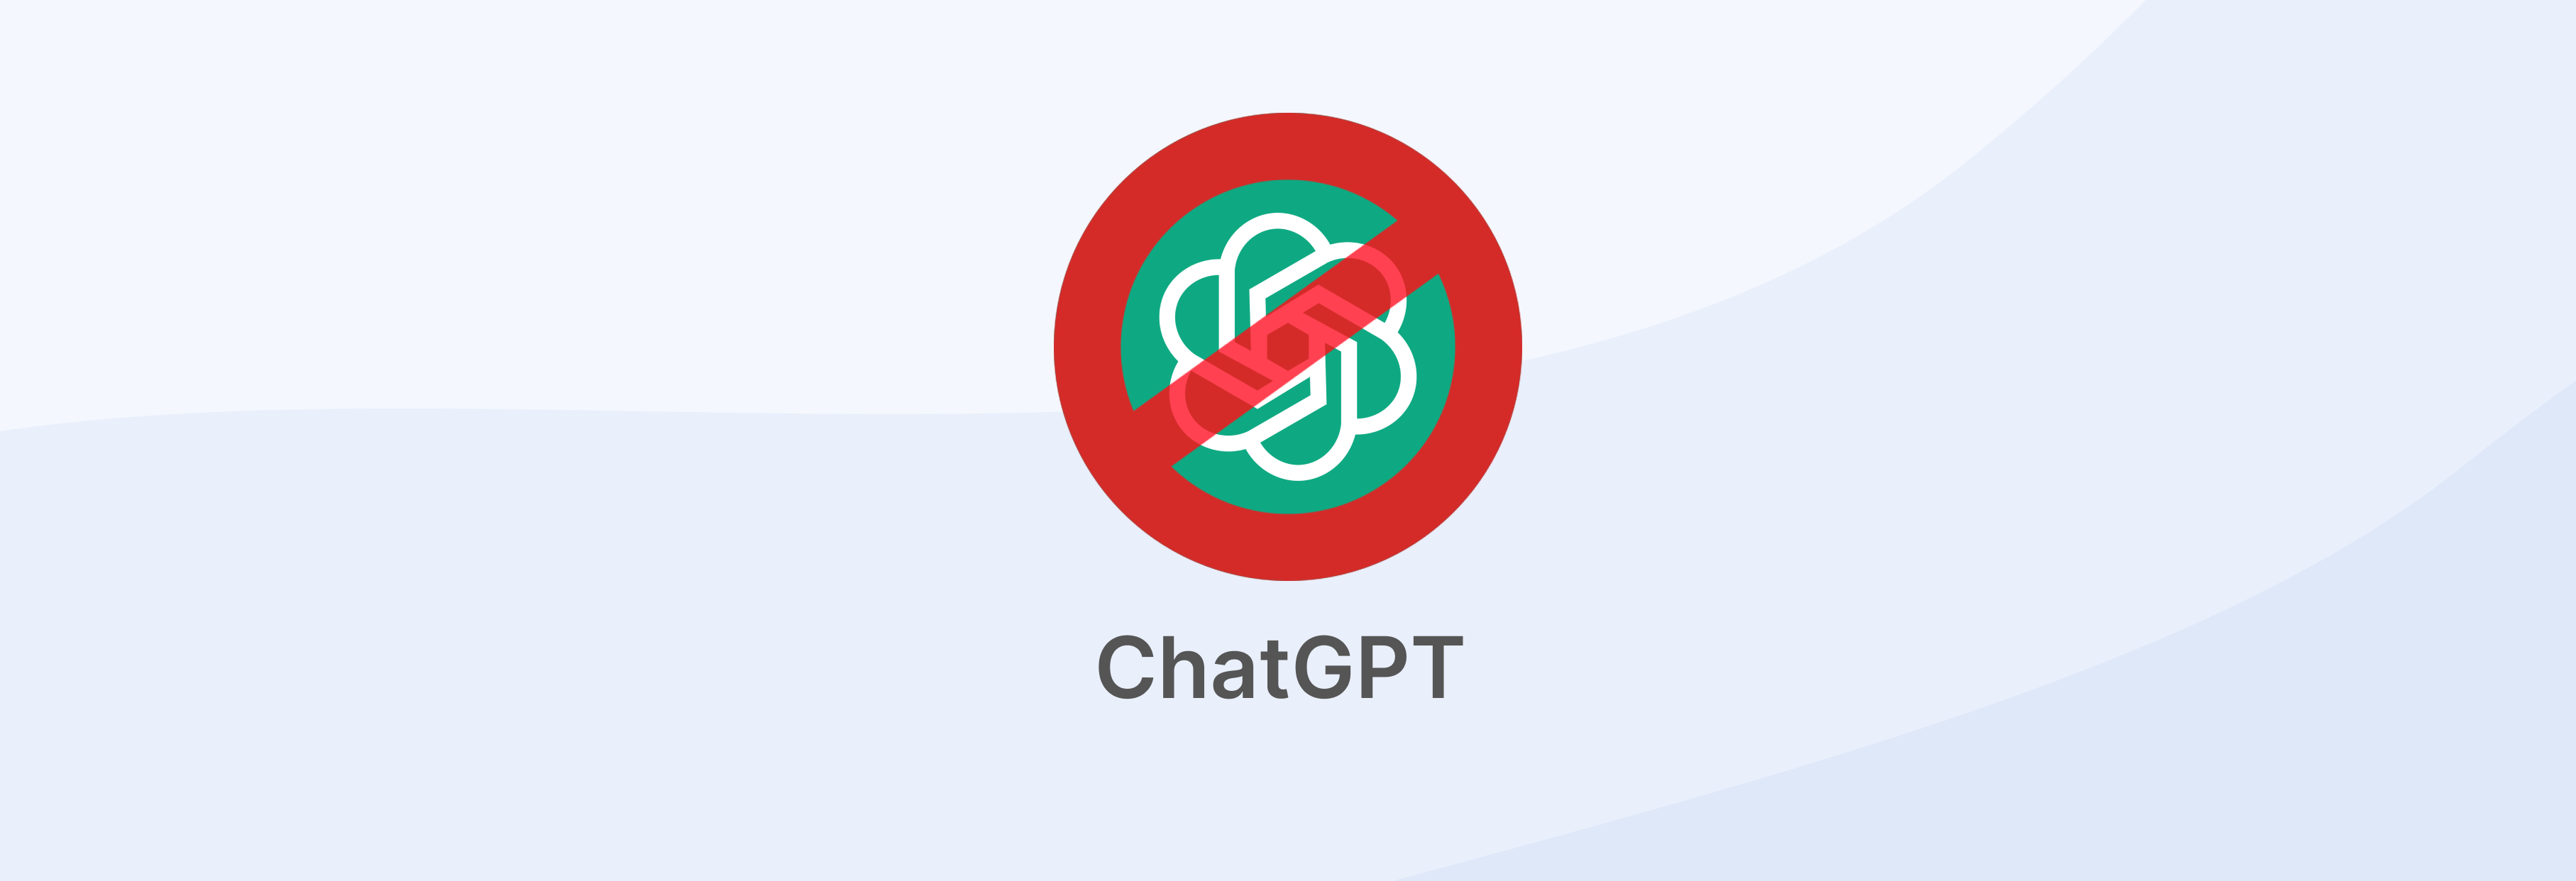 Companies that banned ChatGPT.